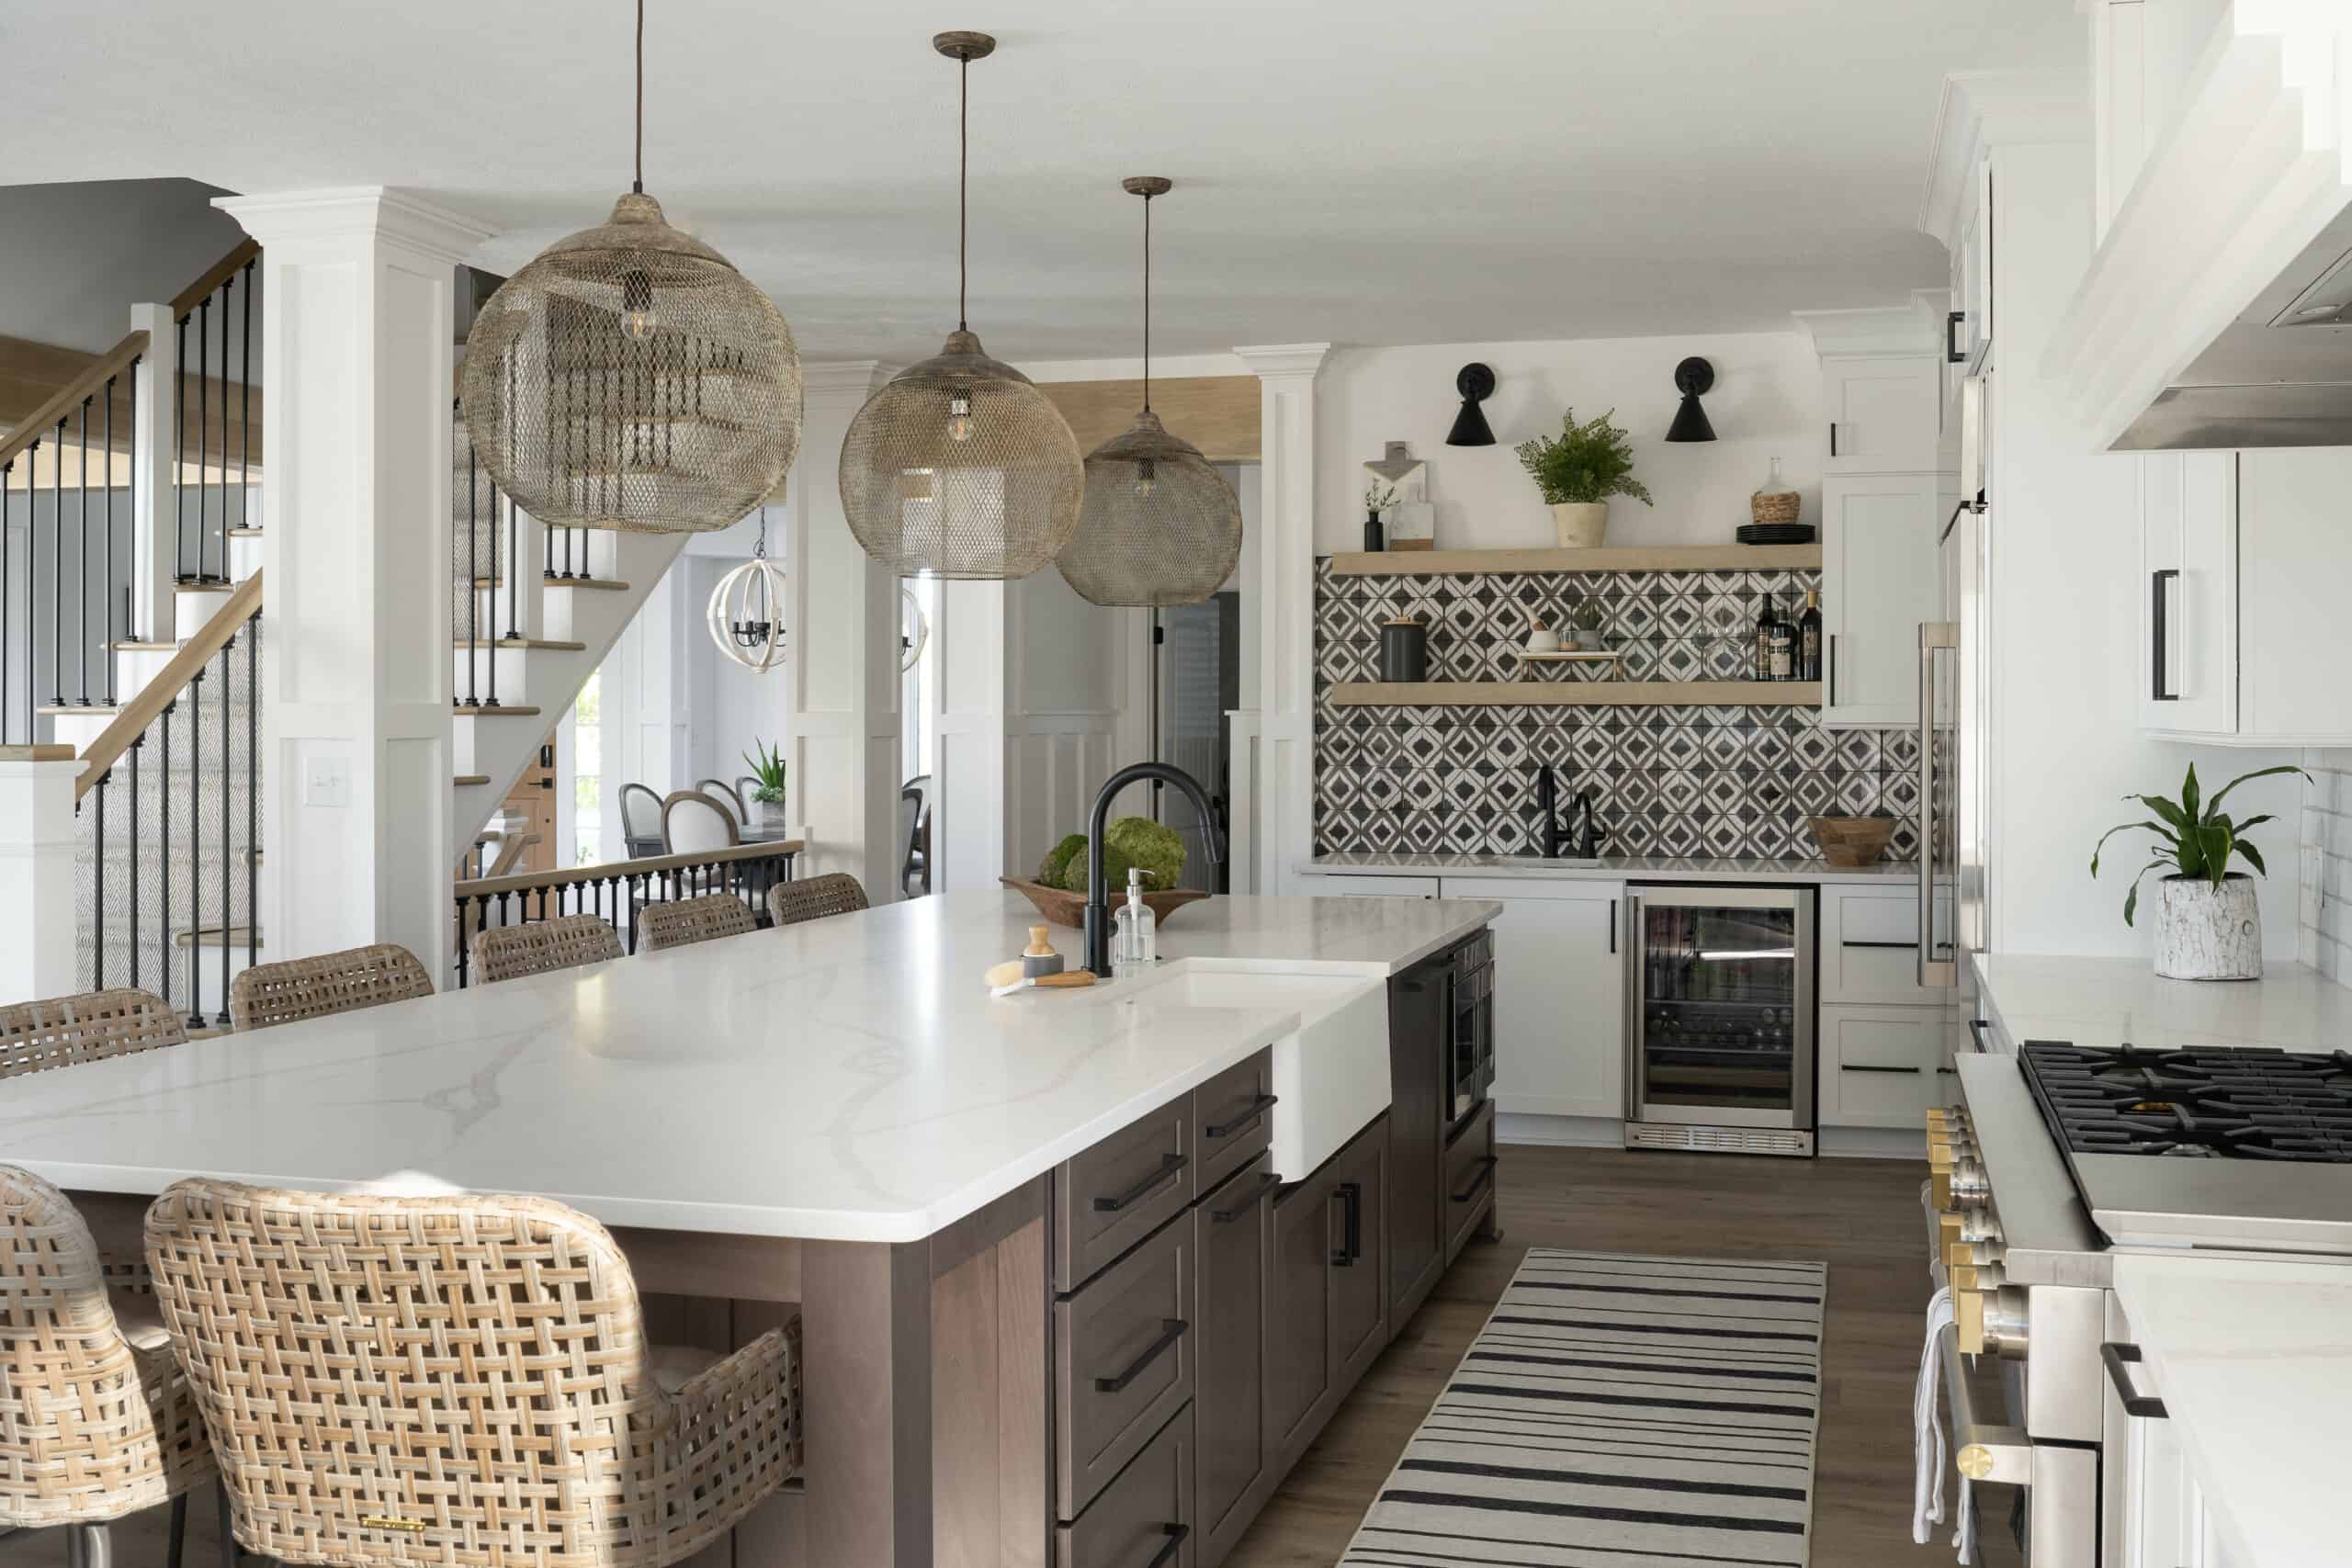 Boho style kitchen with wicker pendant lights, wicker barstools at large center island, farmhouse sink, and mini bar.